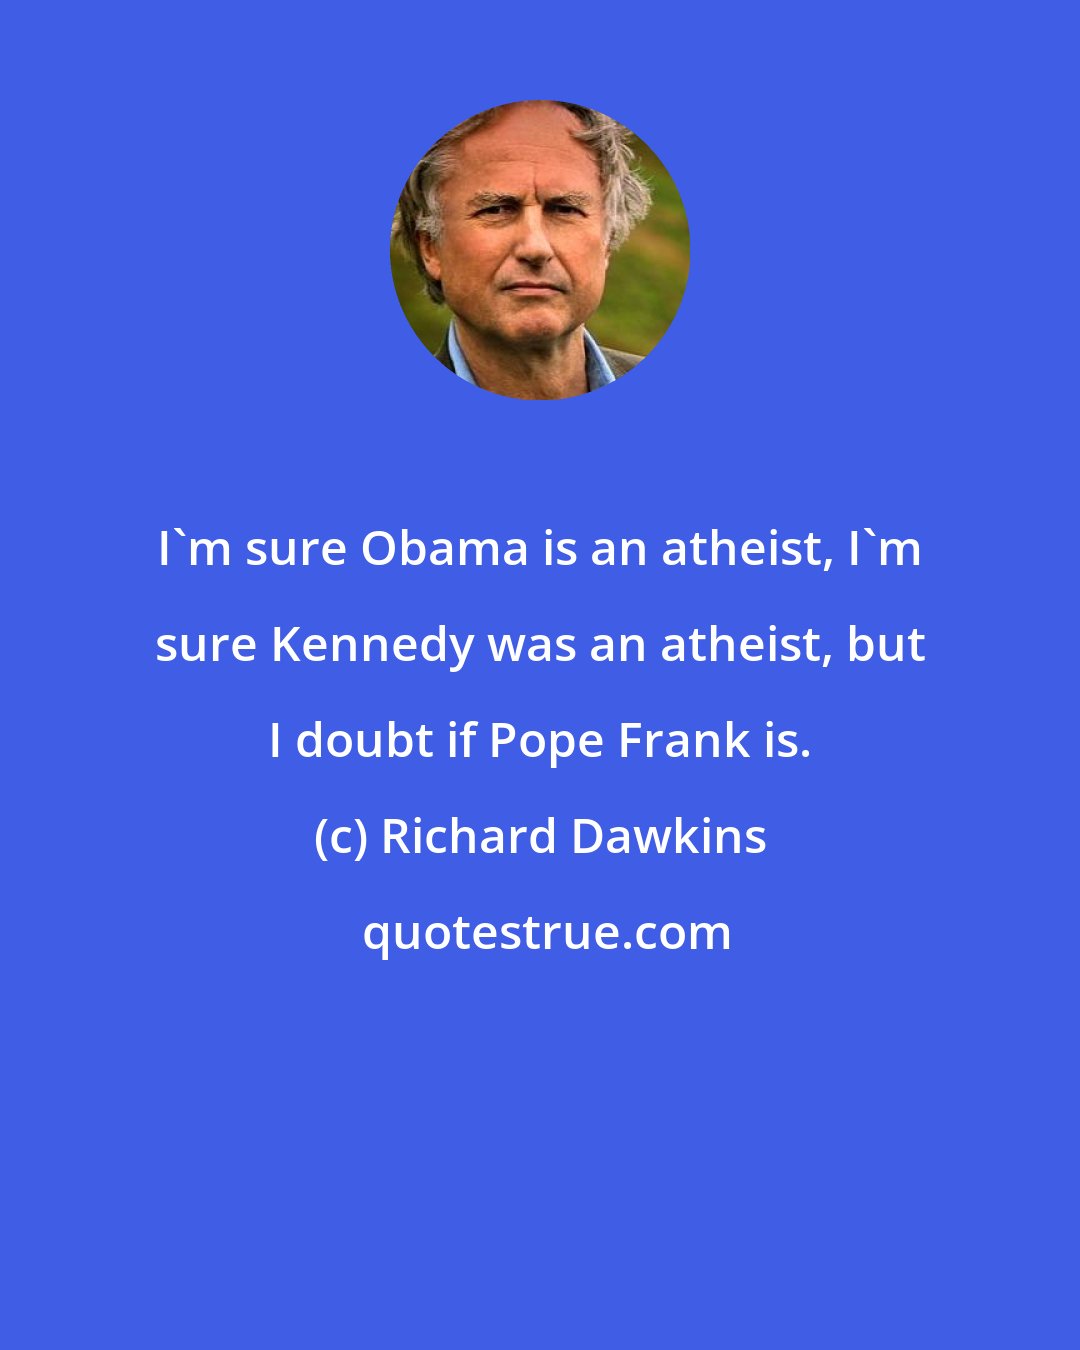 Richard Dawkins: I'm sure Obama is an atheist, I'm sure Kennedy was an atheist, but I doubt if Pope Frank is.